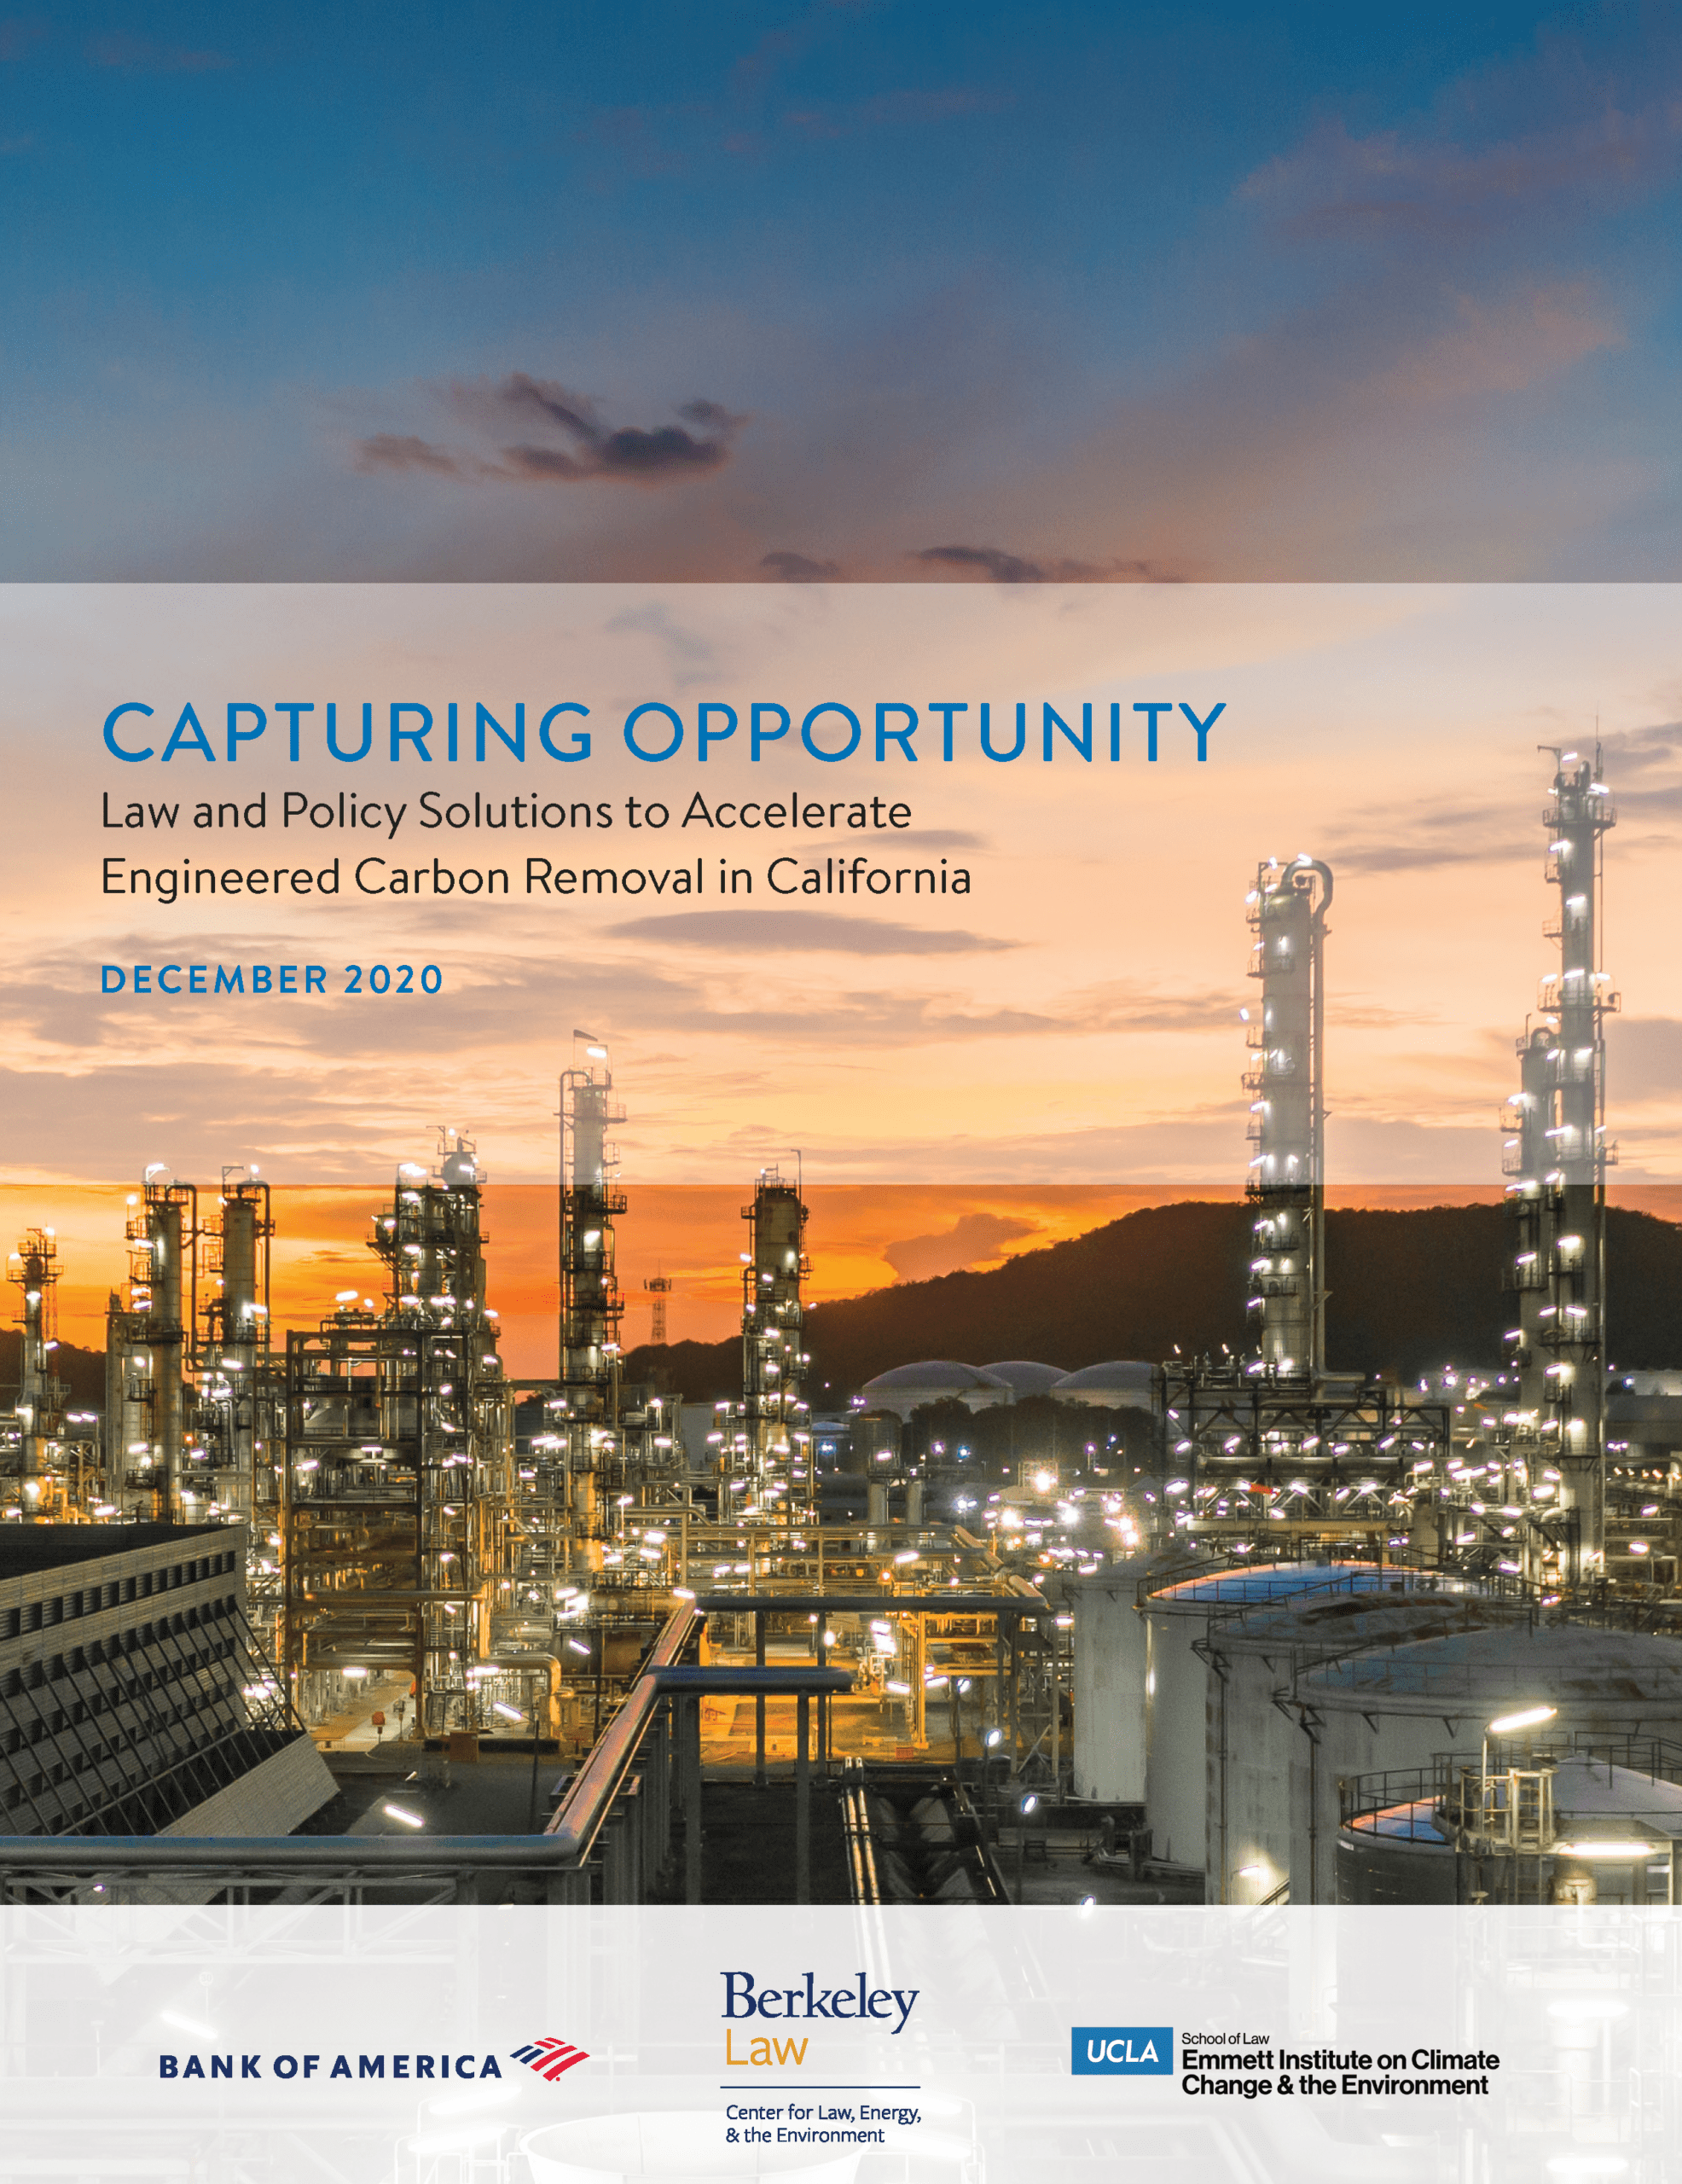 View PDF report for Capturing Opportunity, Law and Policy Solutions to Accelerate Engineered Carbon Removal in California, December 2020